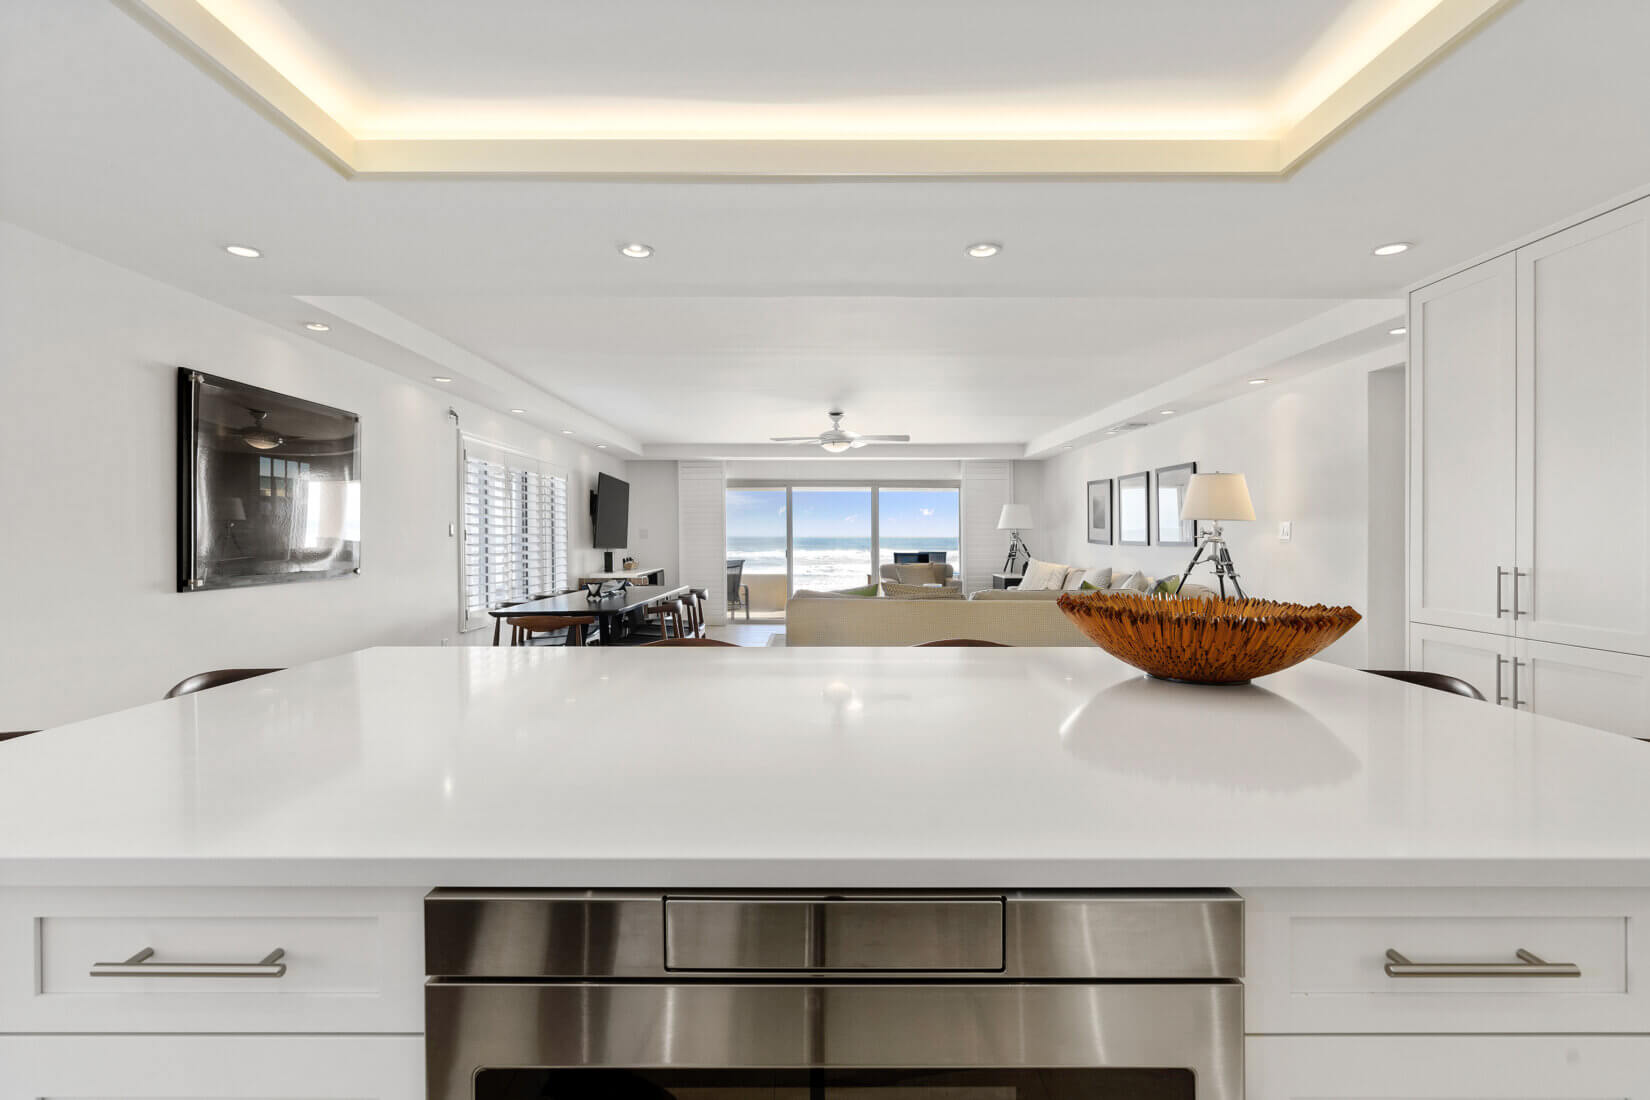 Sleek white kitchen design with large island countertop and modern lighting